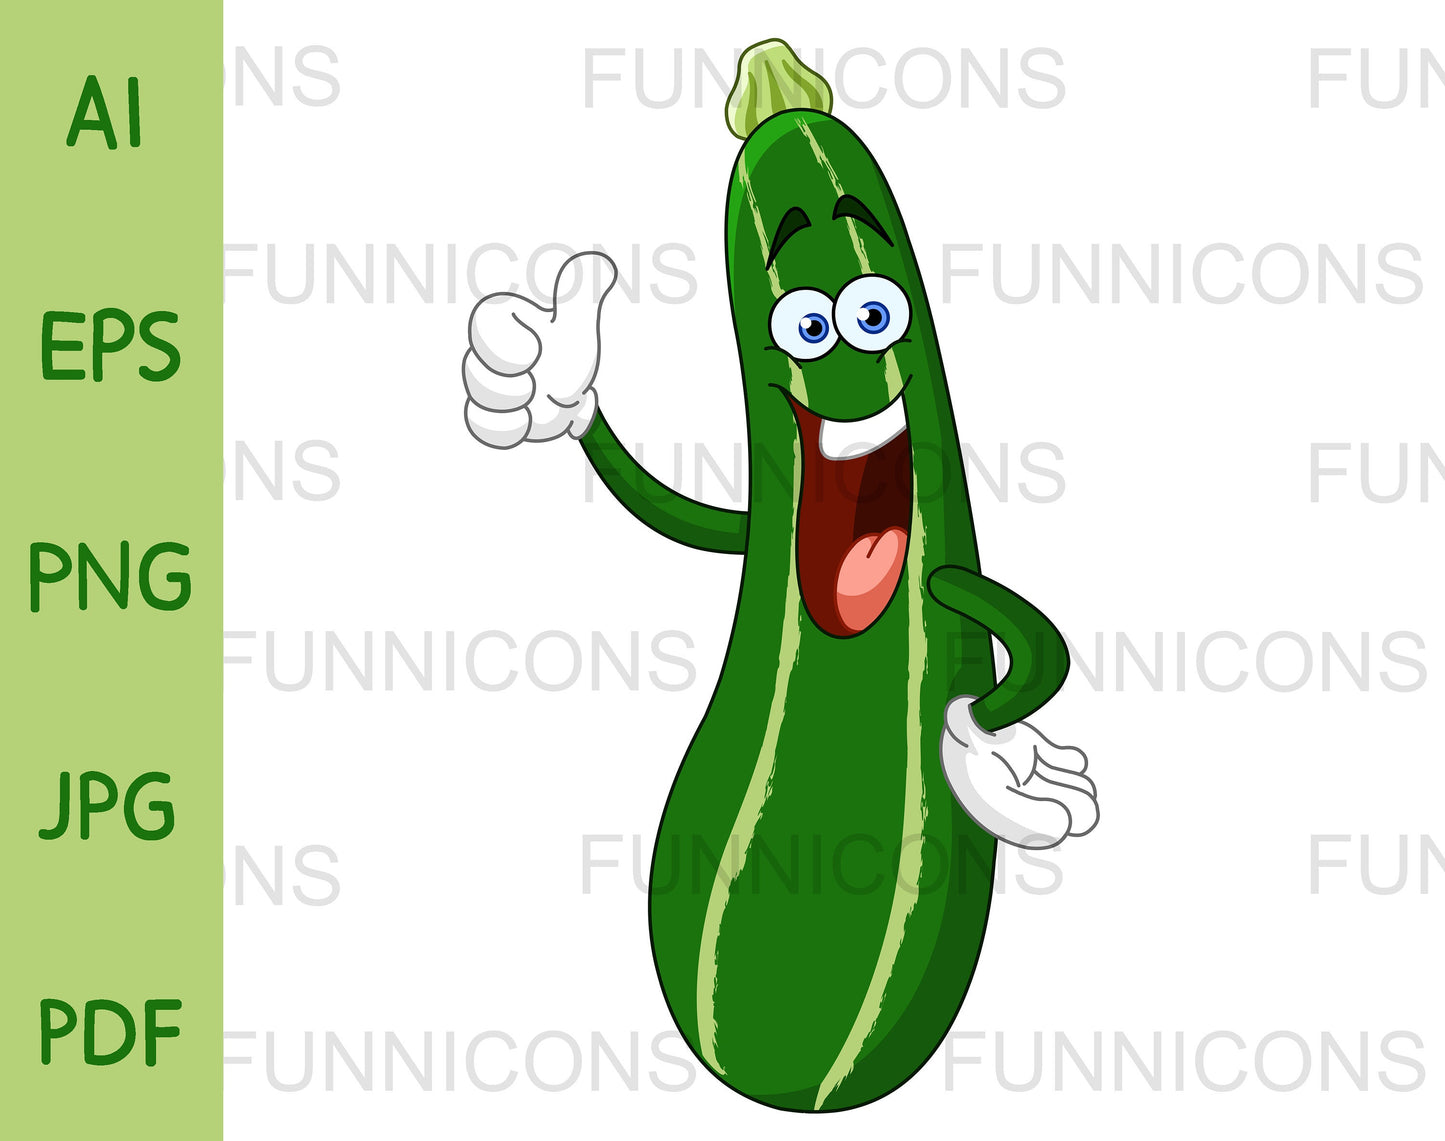 Happy Zucchini Cucumber Cartoon Character Holding a Thumb up, Like Gesture